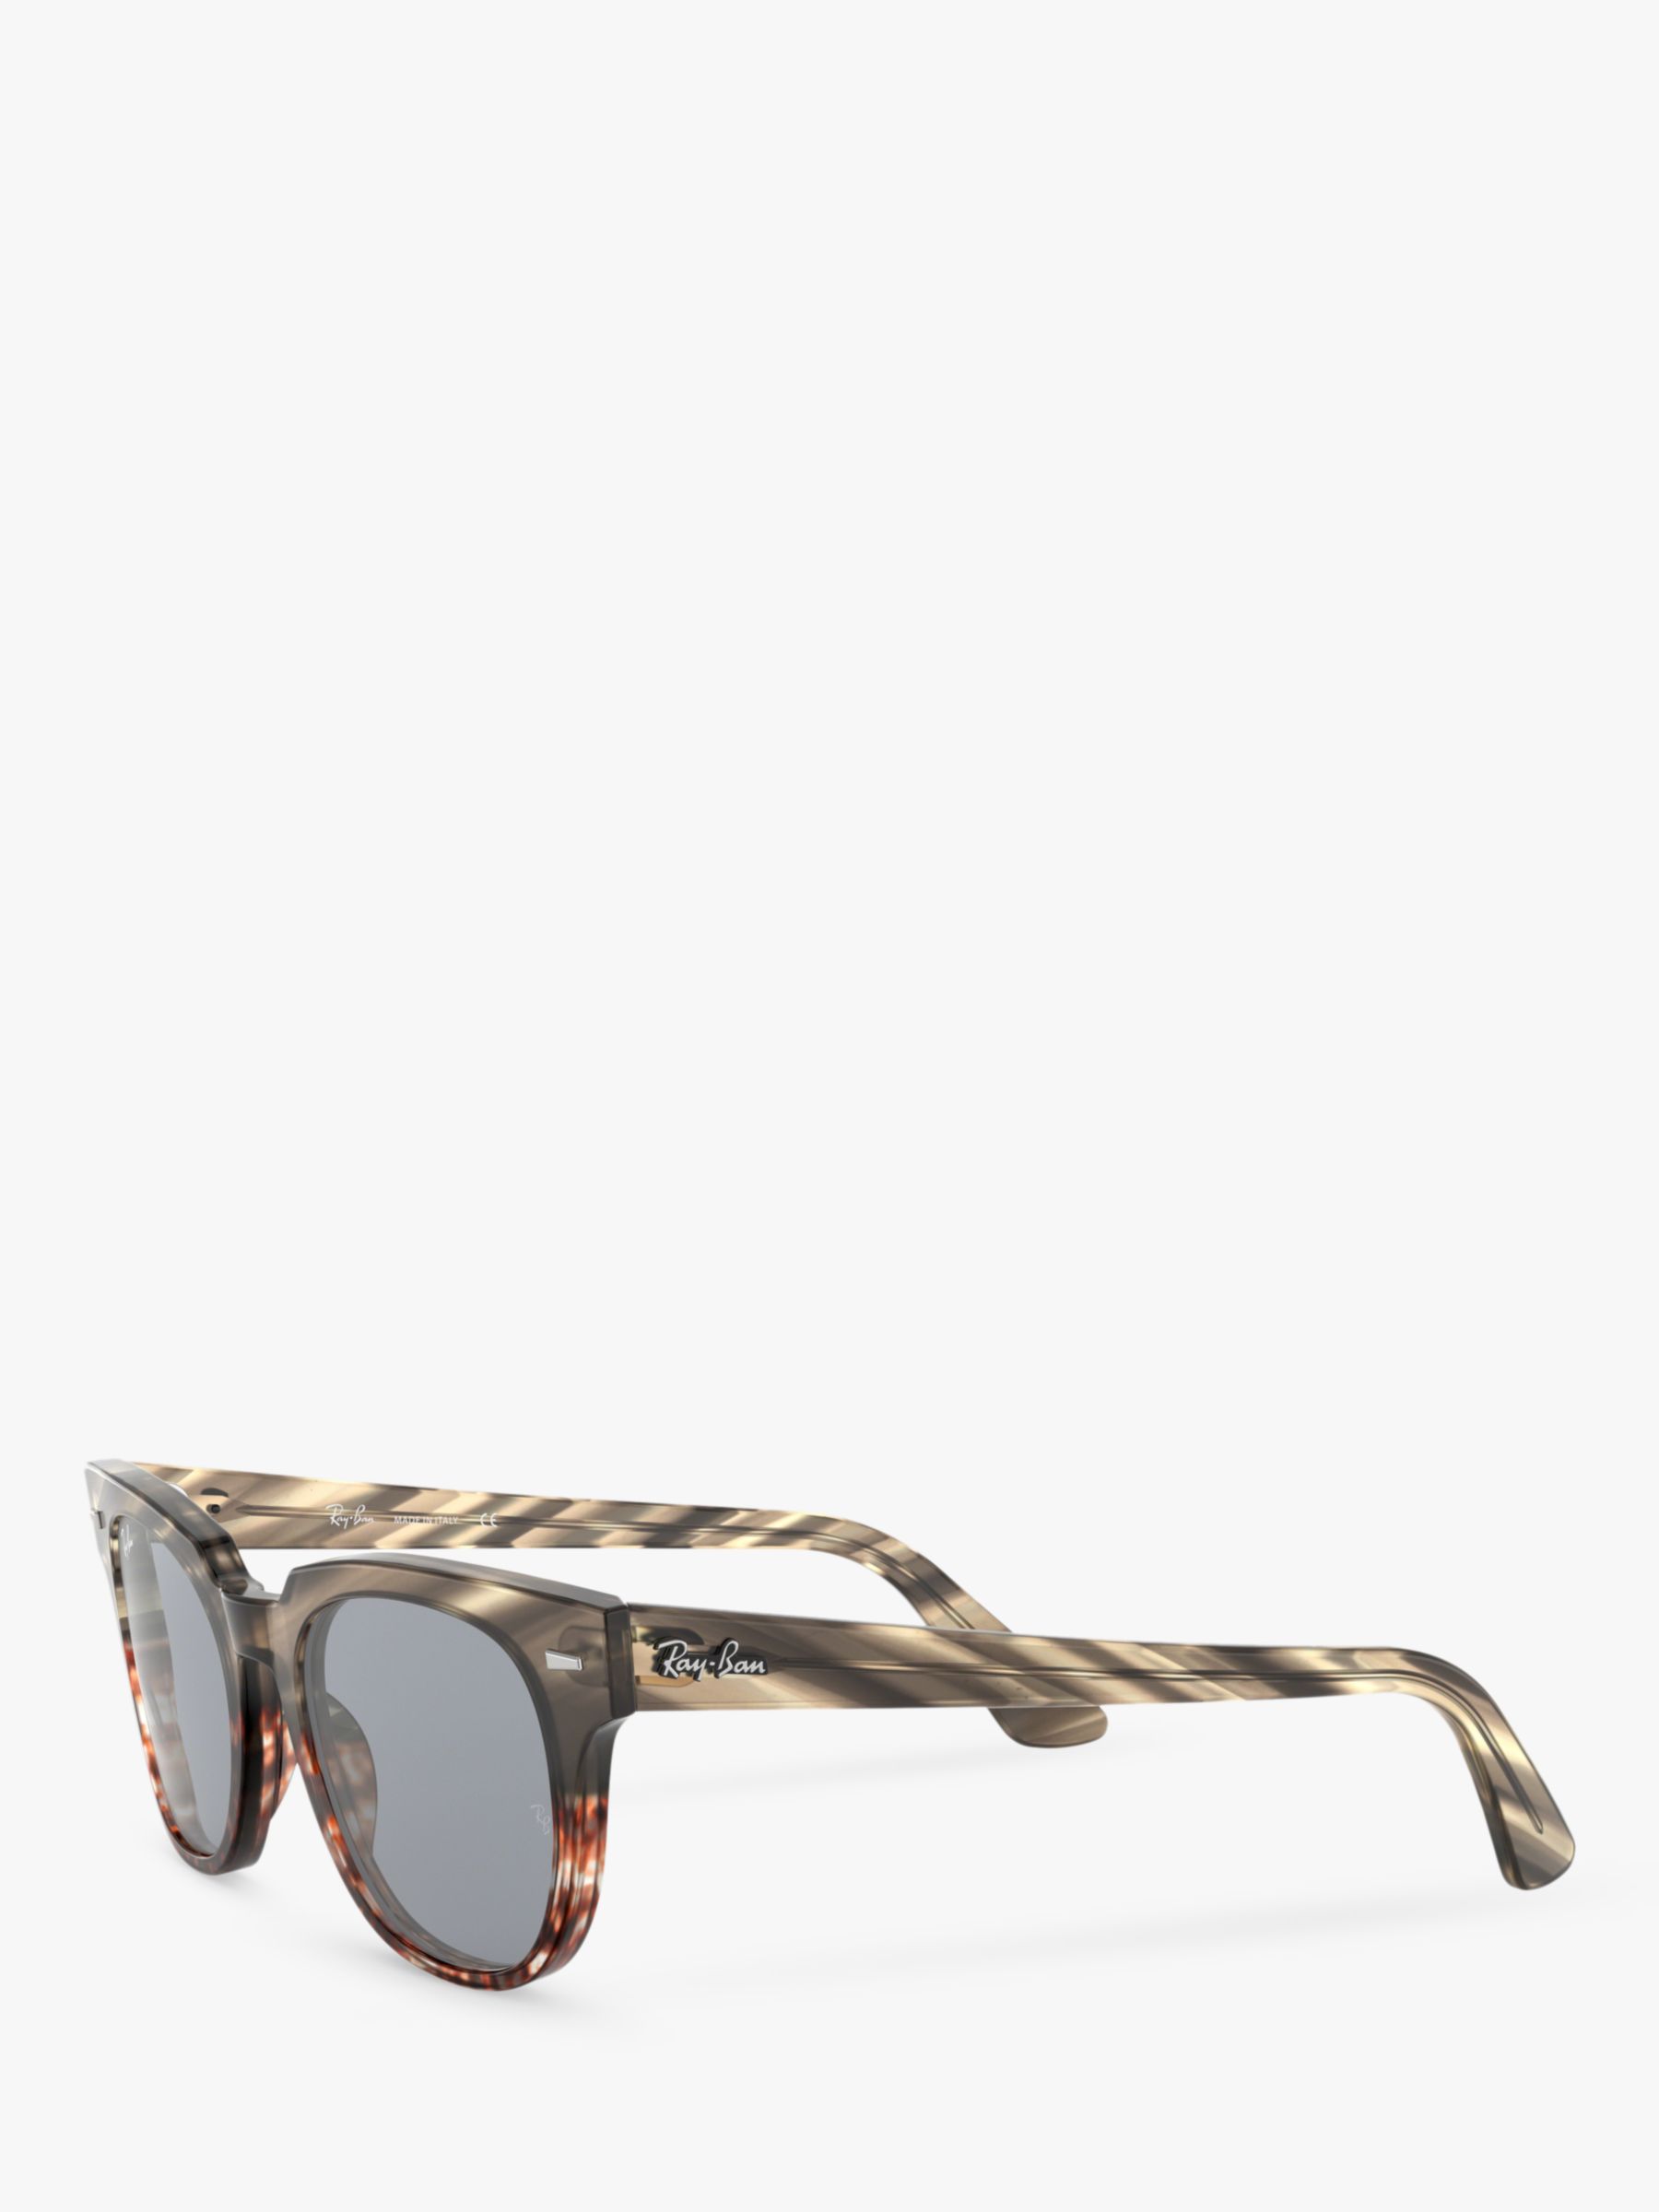 Ray Ban Rb2168 Unisex Square Sunglasses Brown Stripedgrey Gradient At John Lewis And Partners 5340